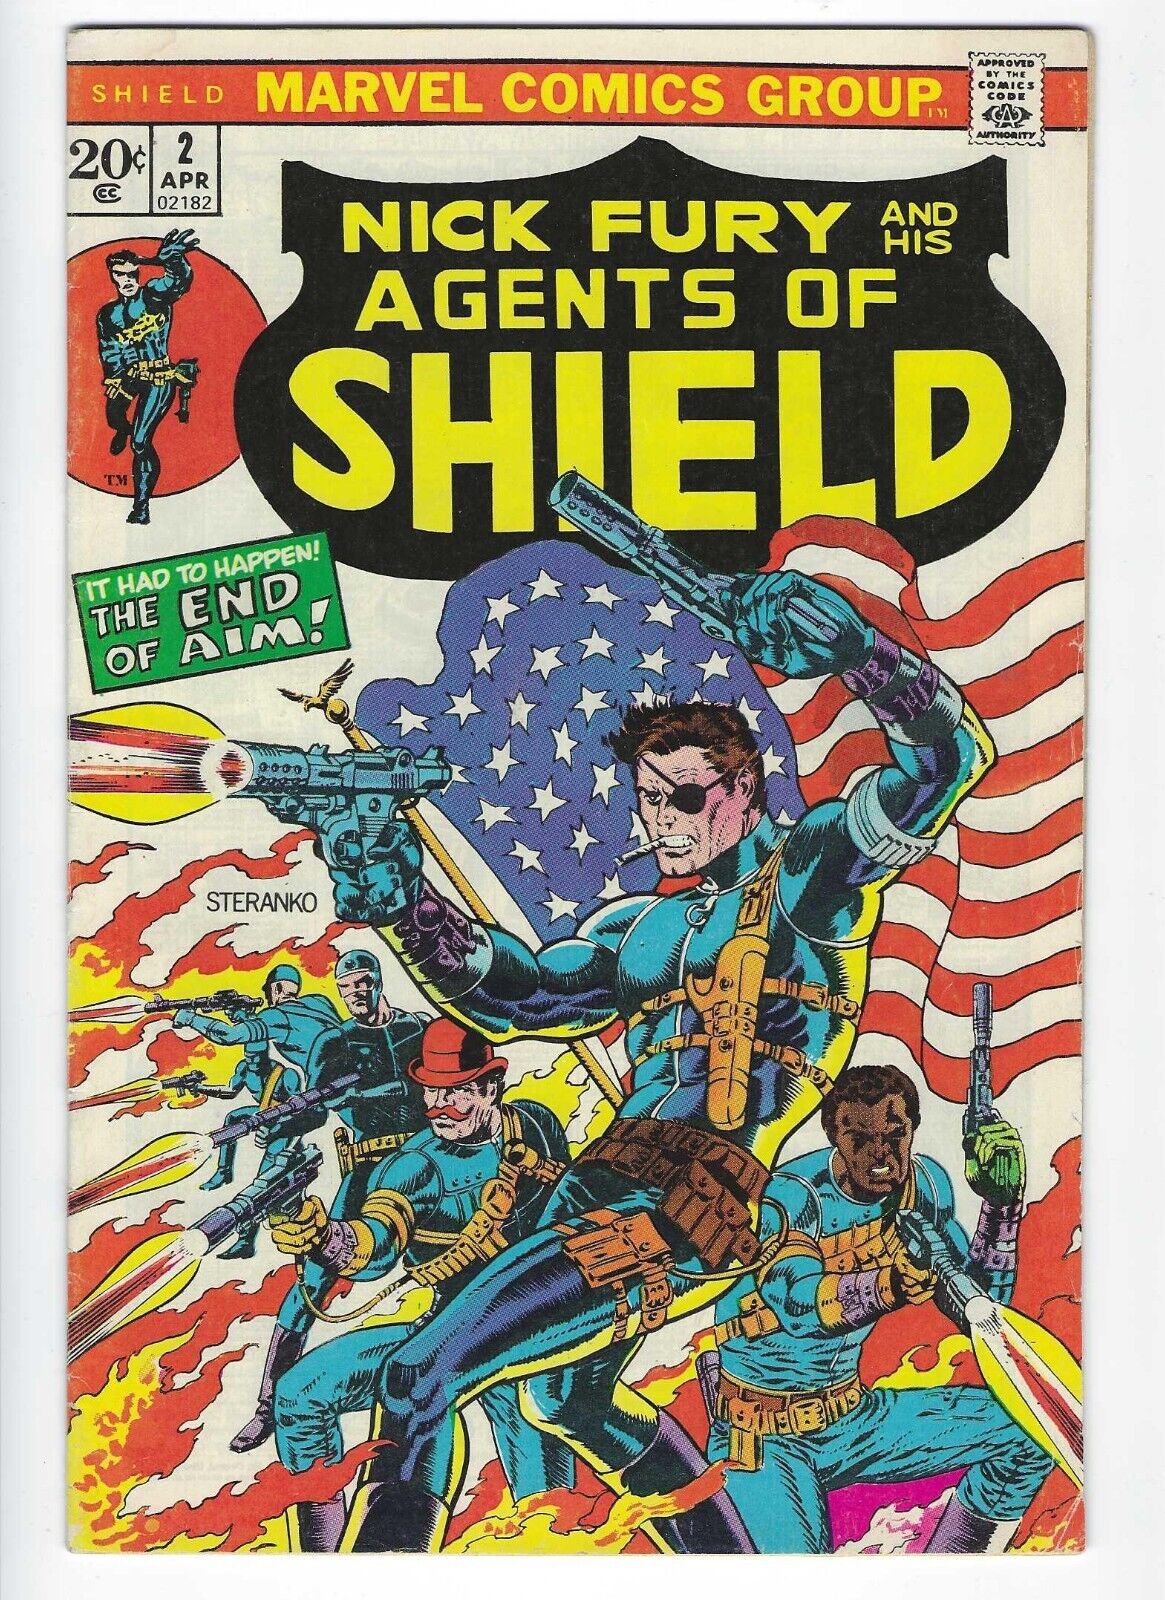 Nick Fury And His Agents of Shield #2 Steranko Marvel 1973 Fine